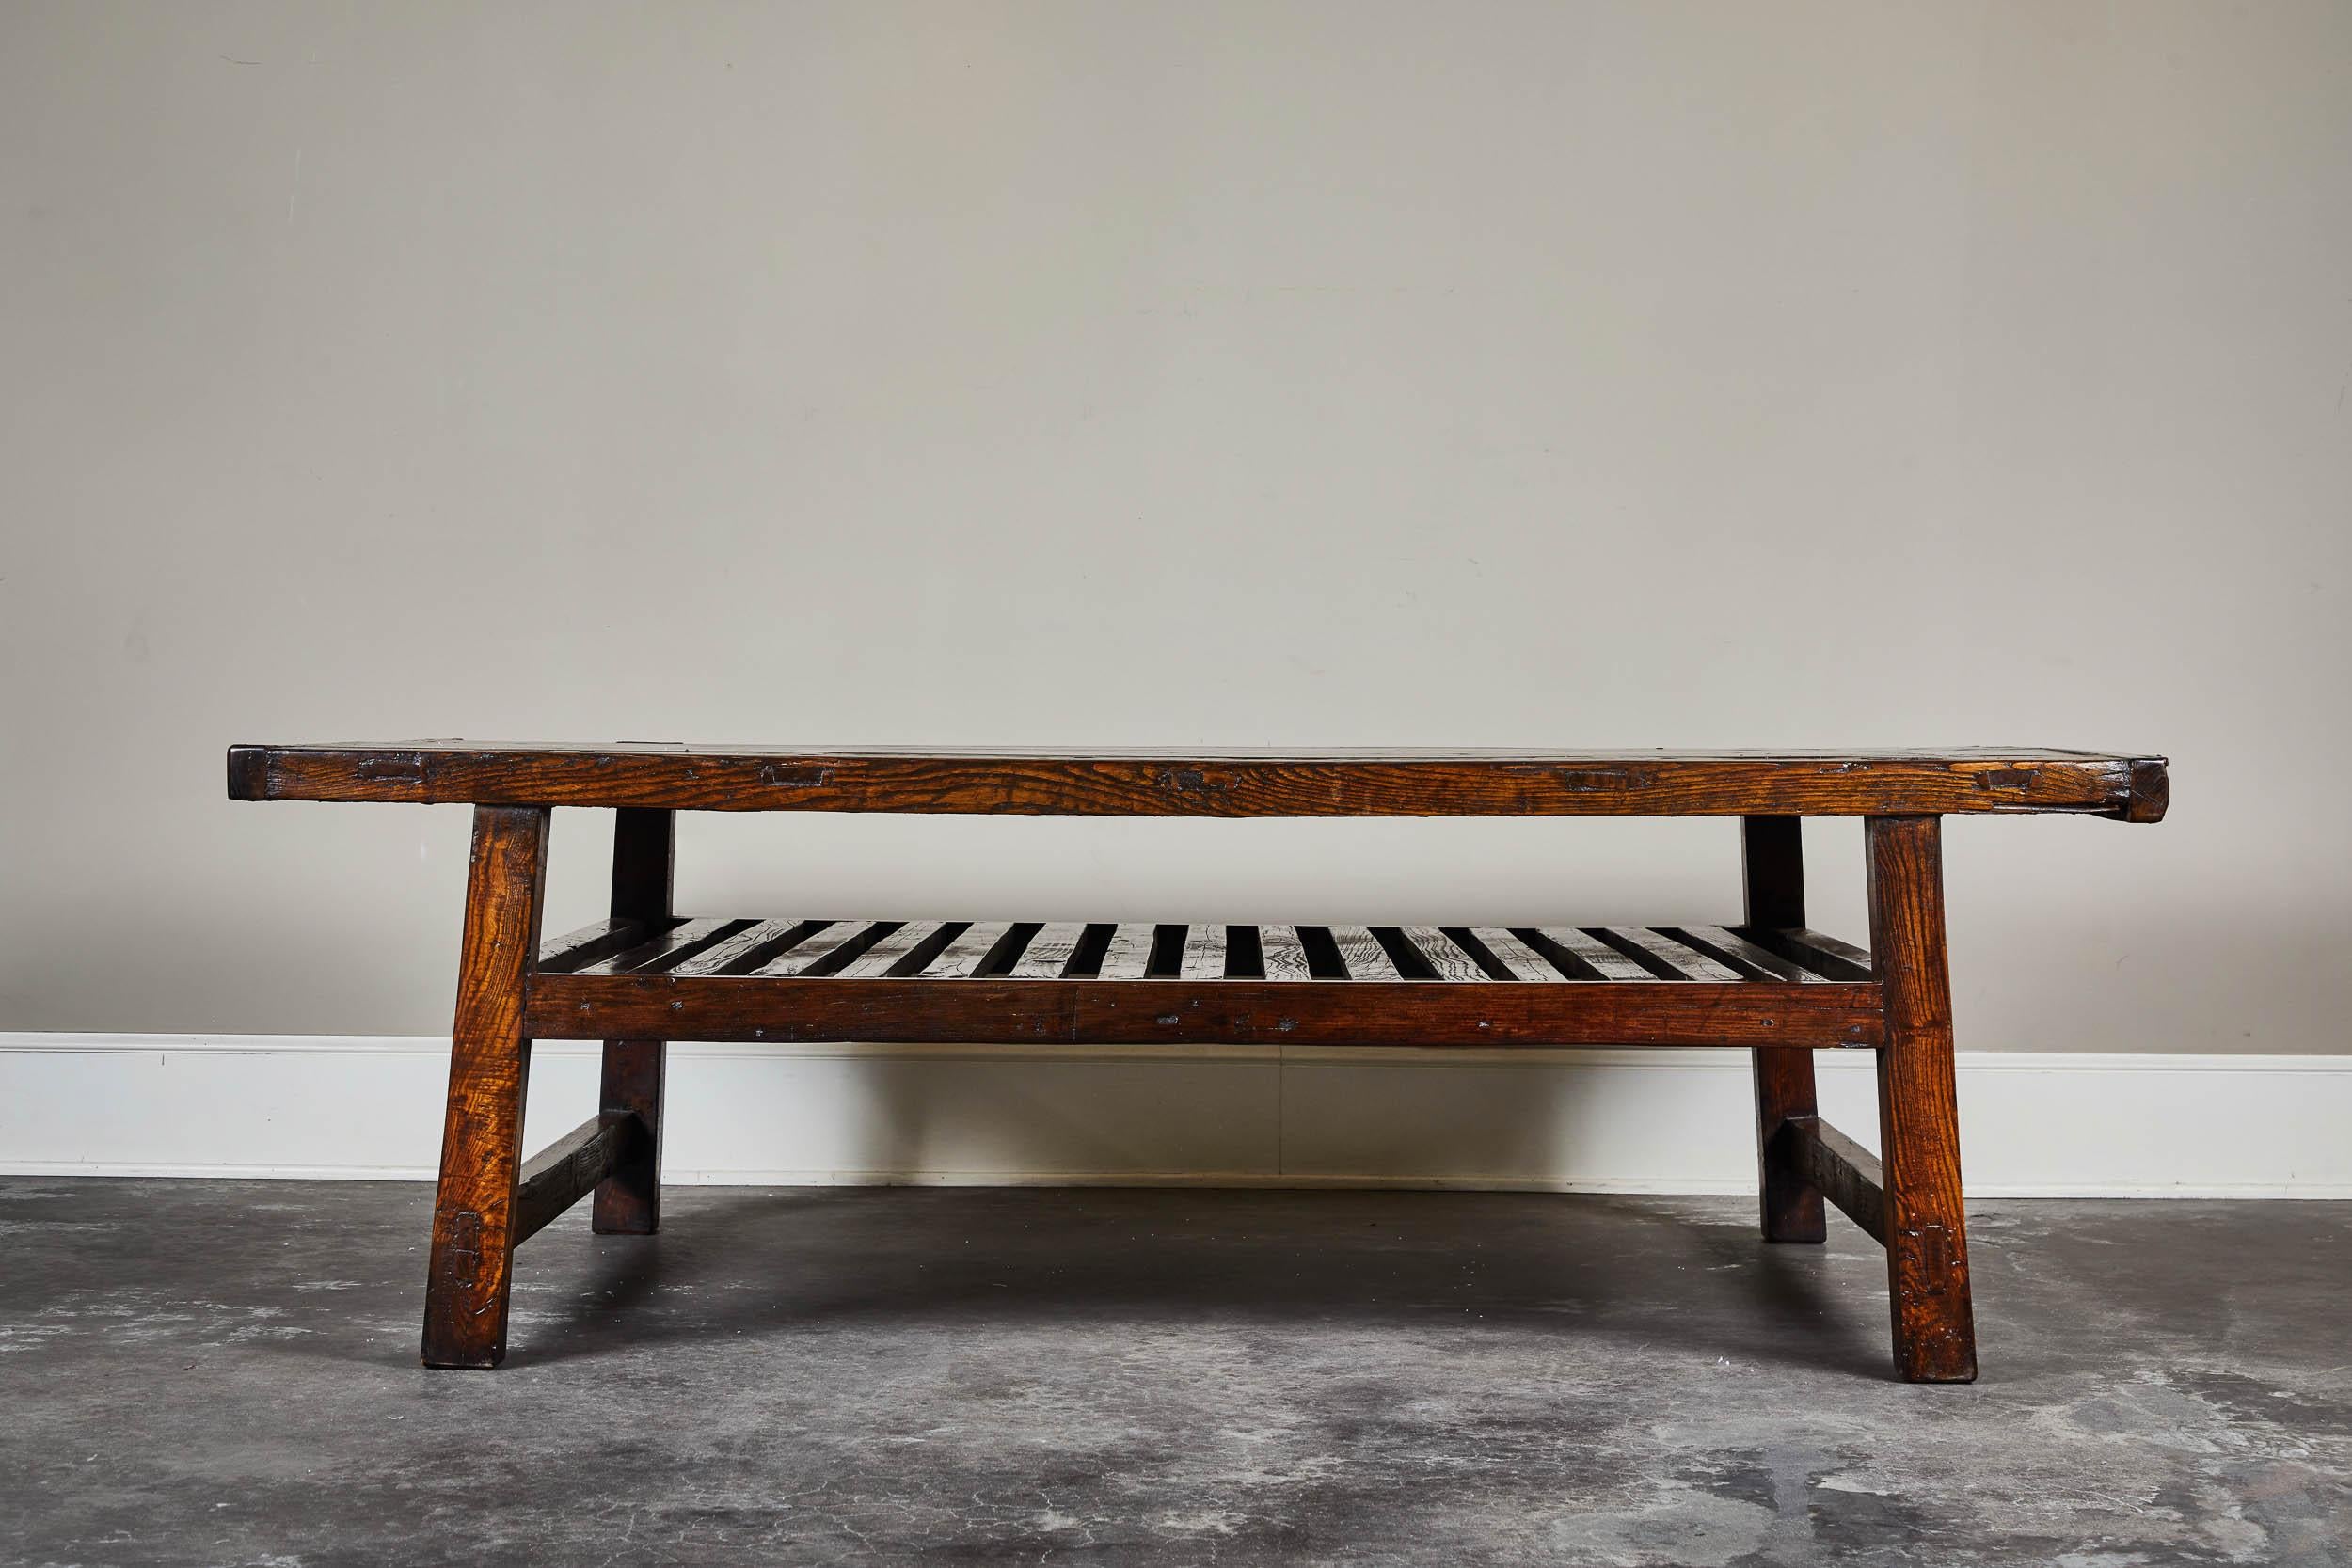 One of a kind low coffee table with one slatted shelf and bookmatched top panels from Shantung.